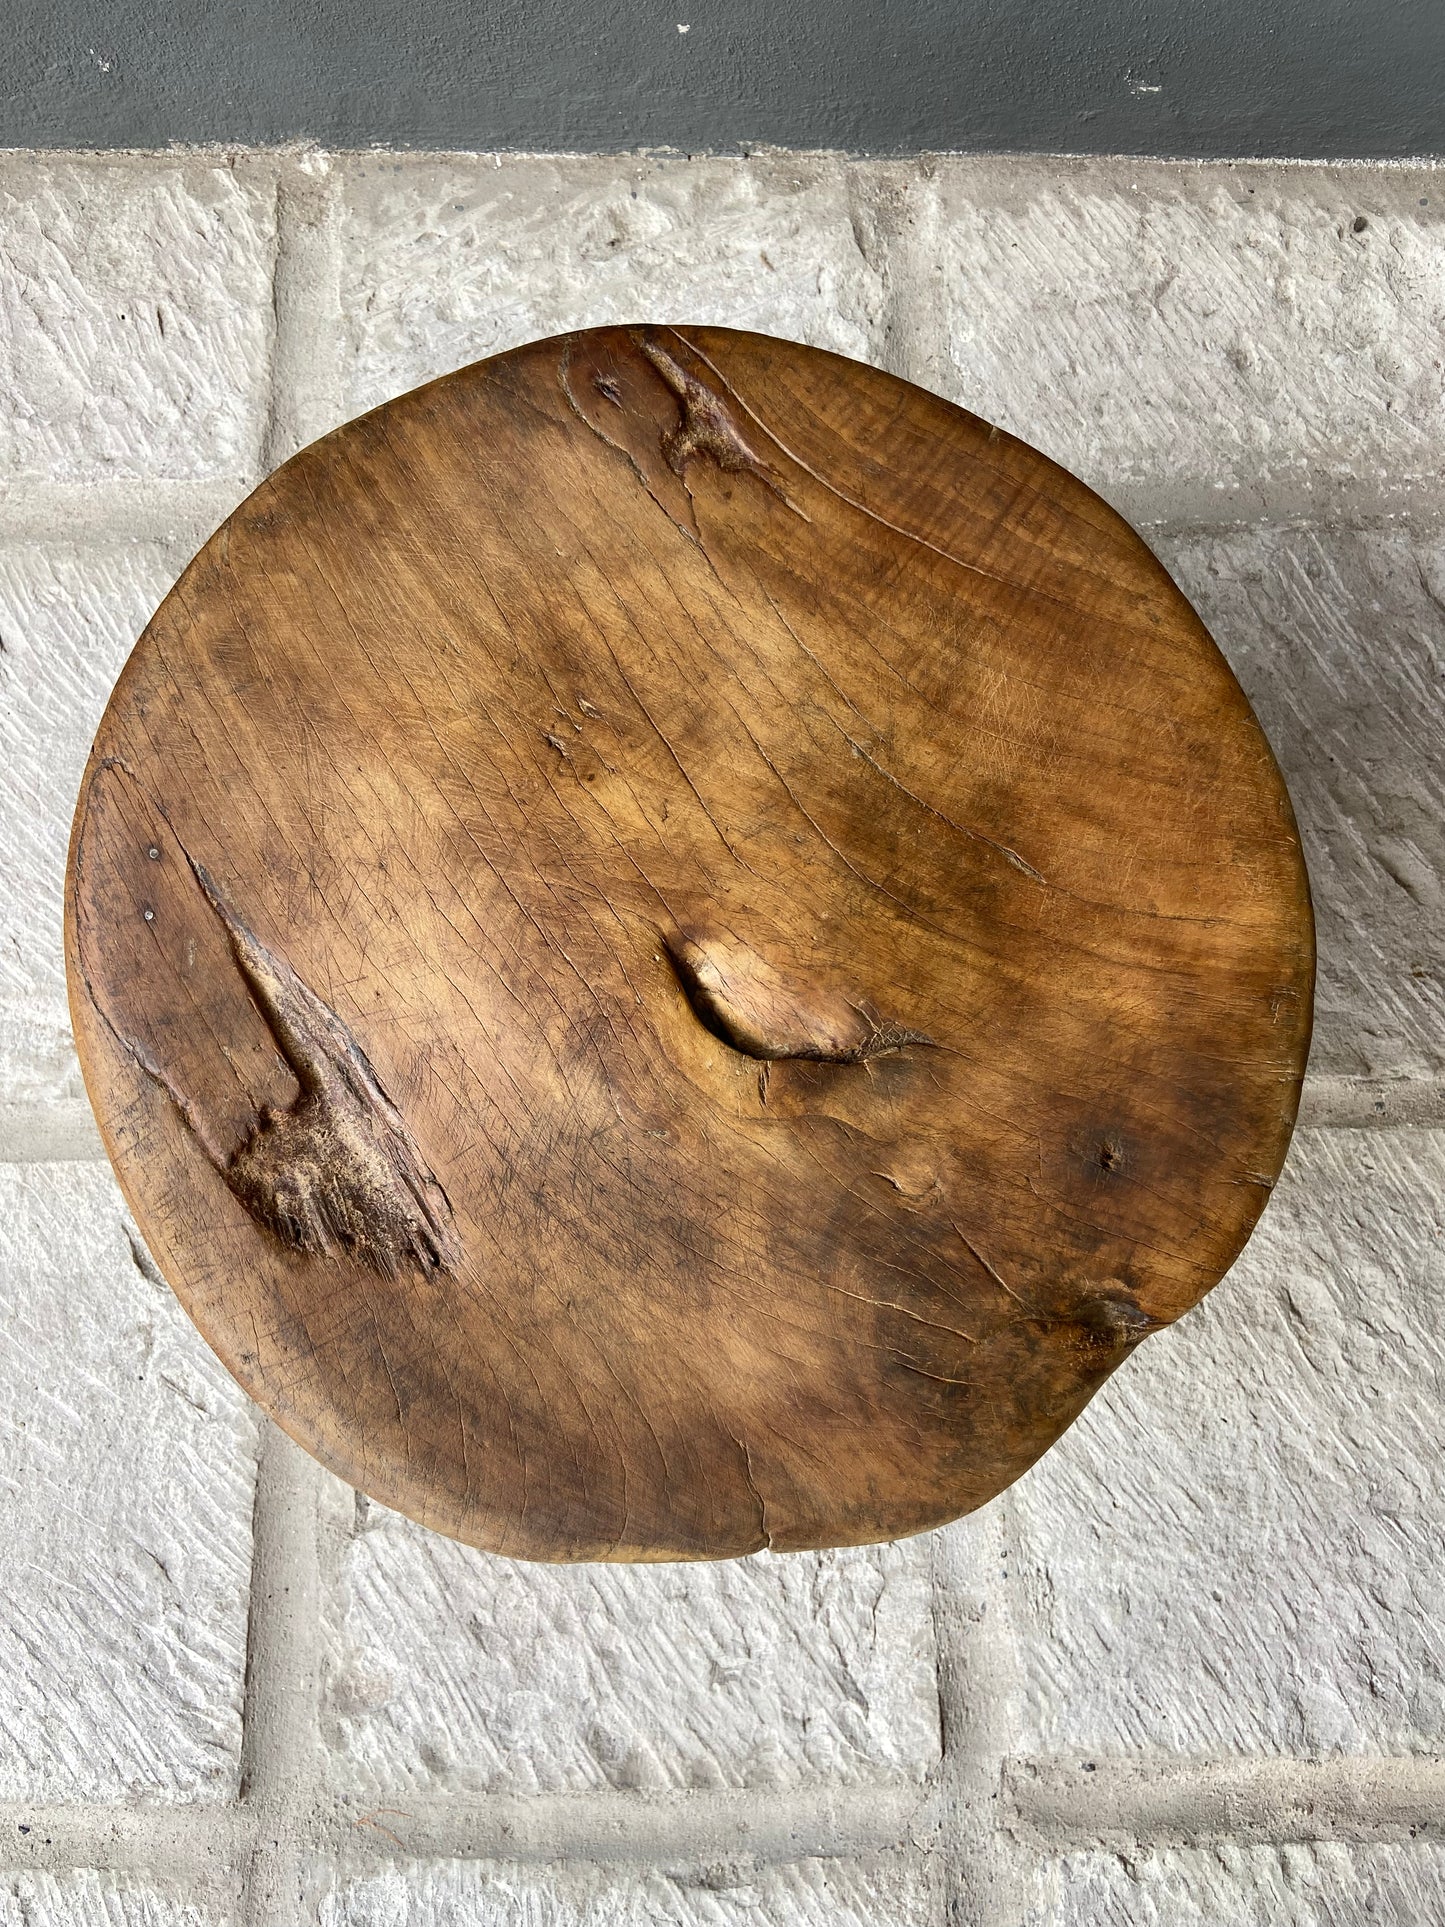 Primitive Round Table From Yucatán